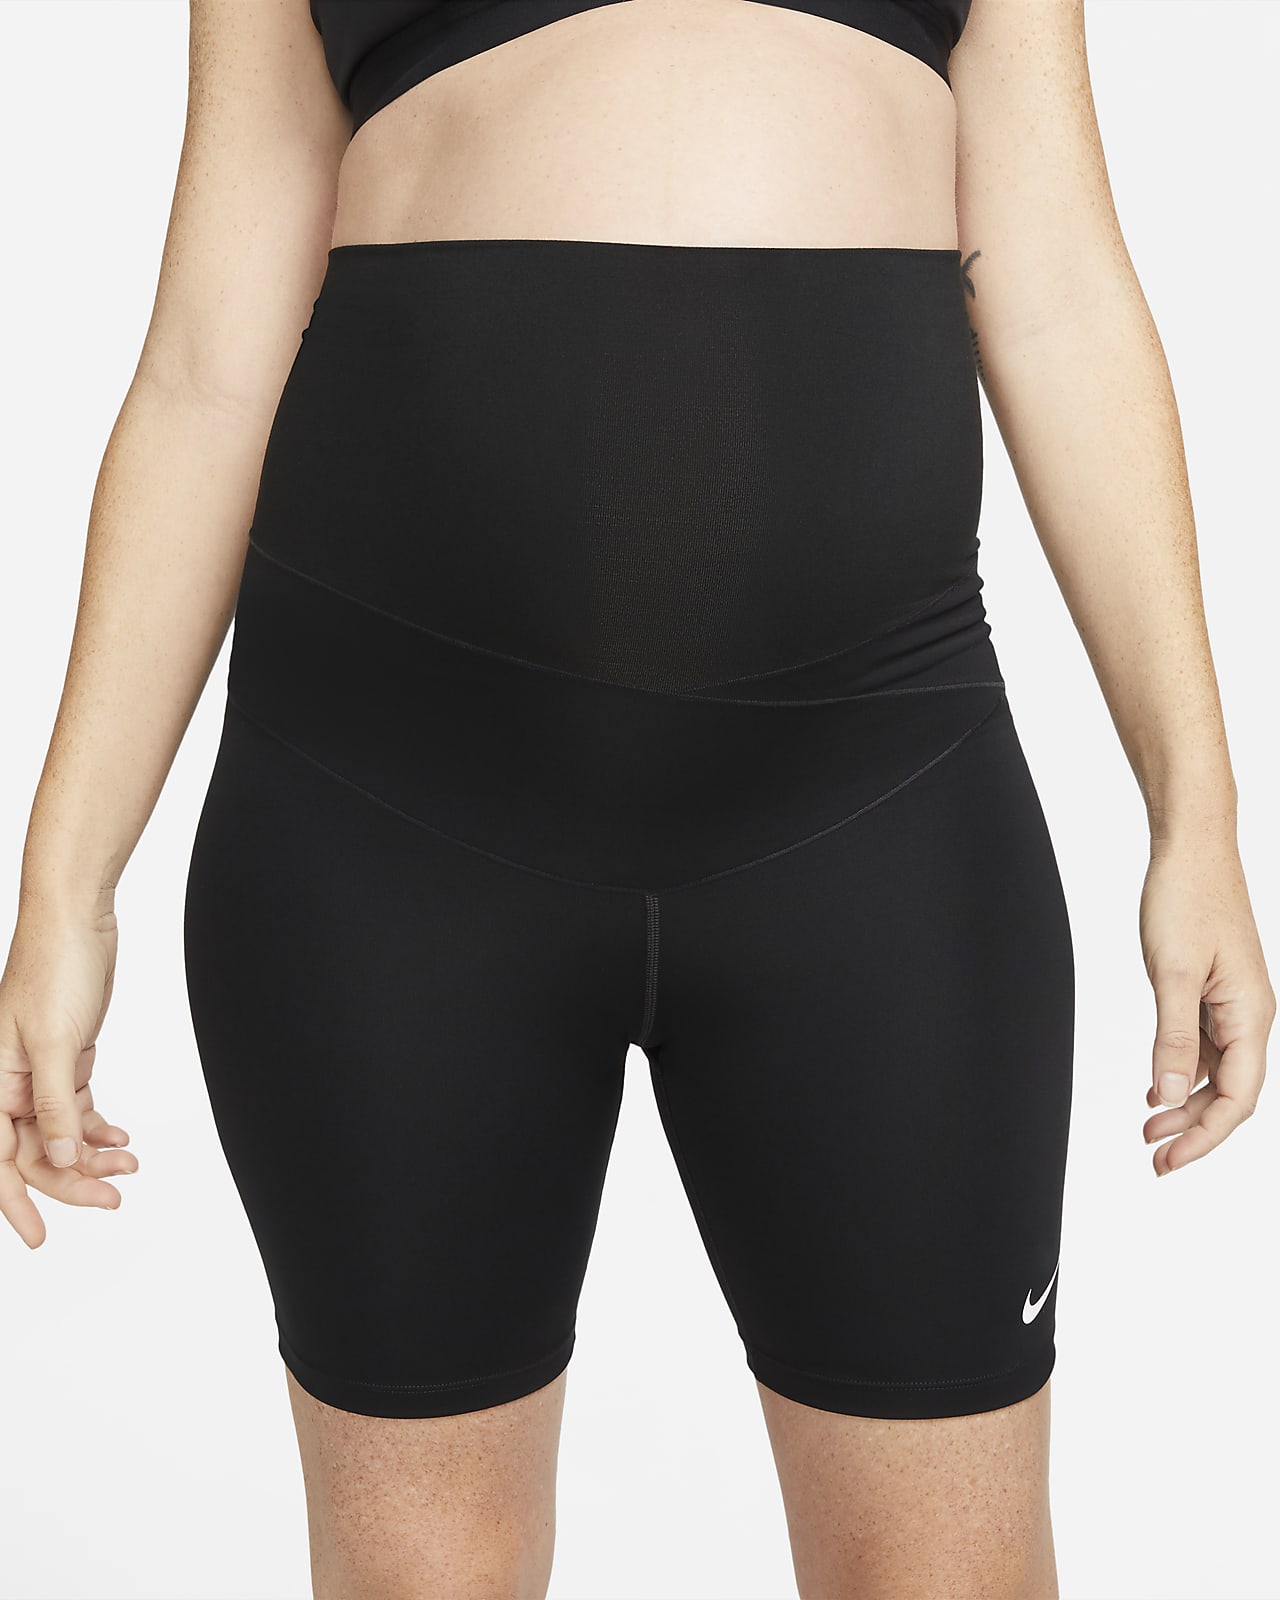 Nike Maternity Leggings and Bikers - clothing & accessories - by